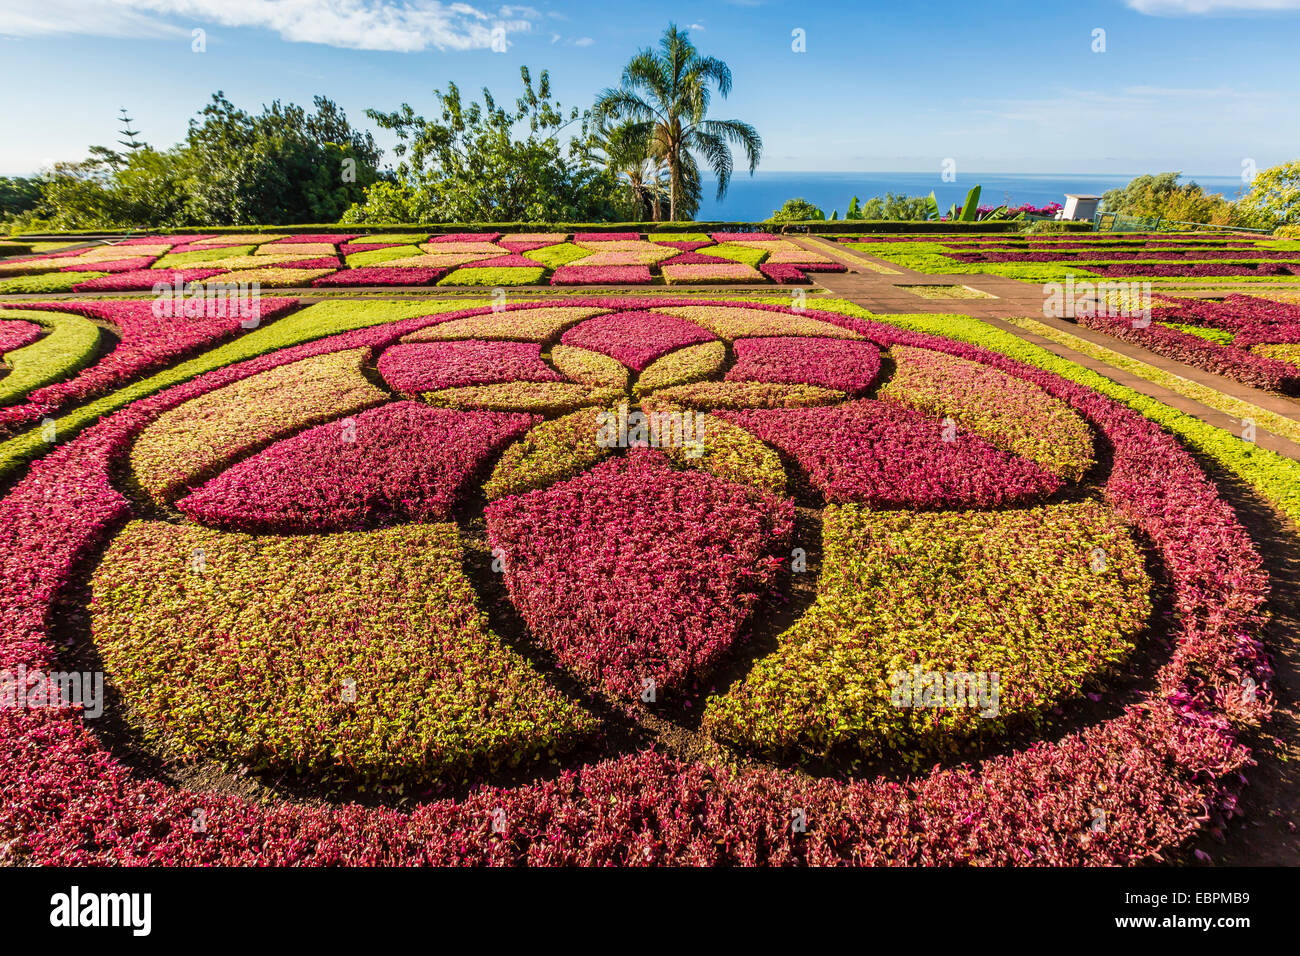 A view of the Botanical Gardens, Jardim Botanico do Funchal, in the city of Funchal, Madeira, Portugal, Europe Stock Photo